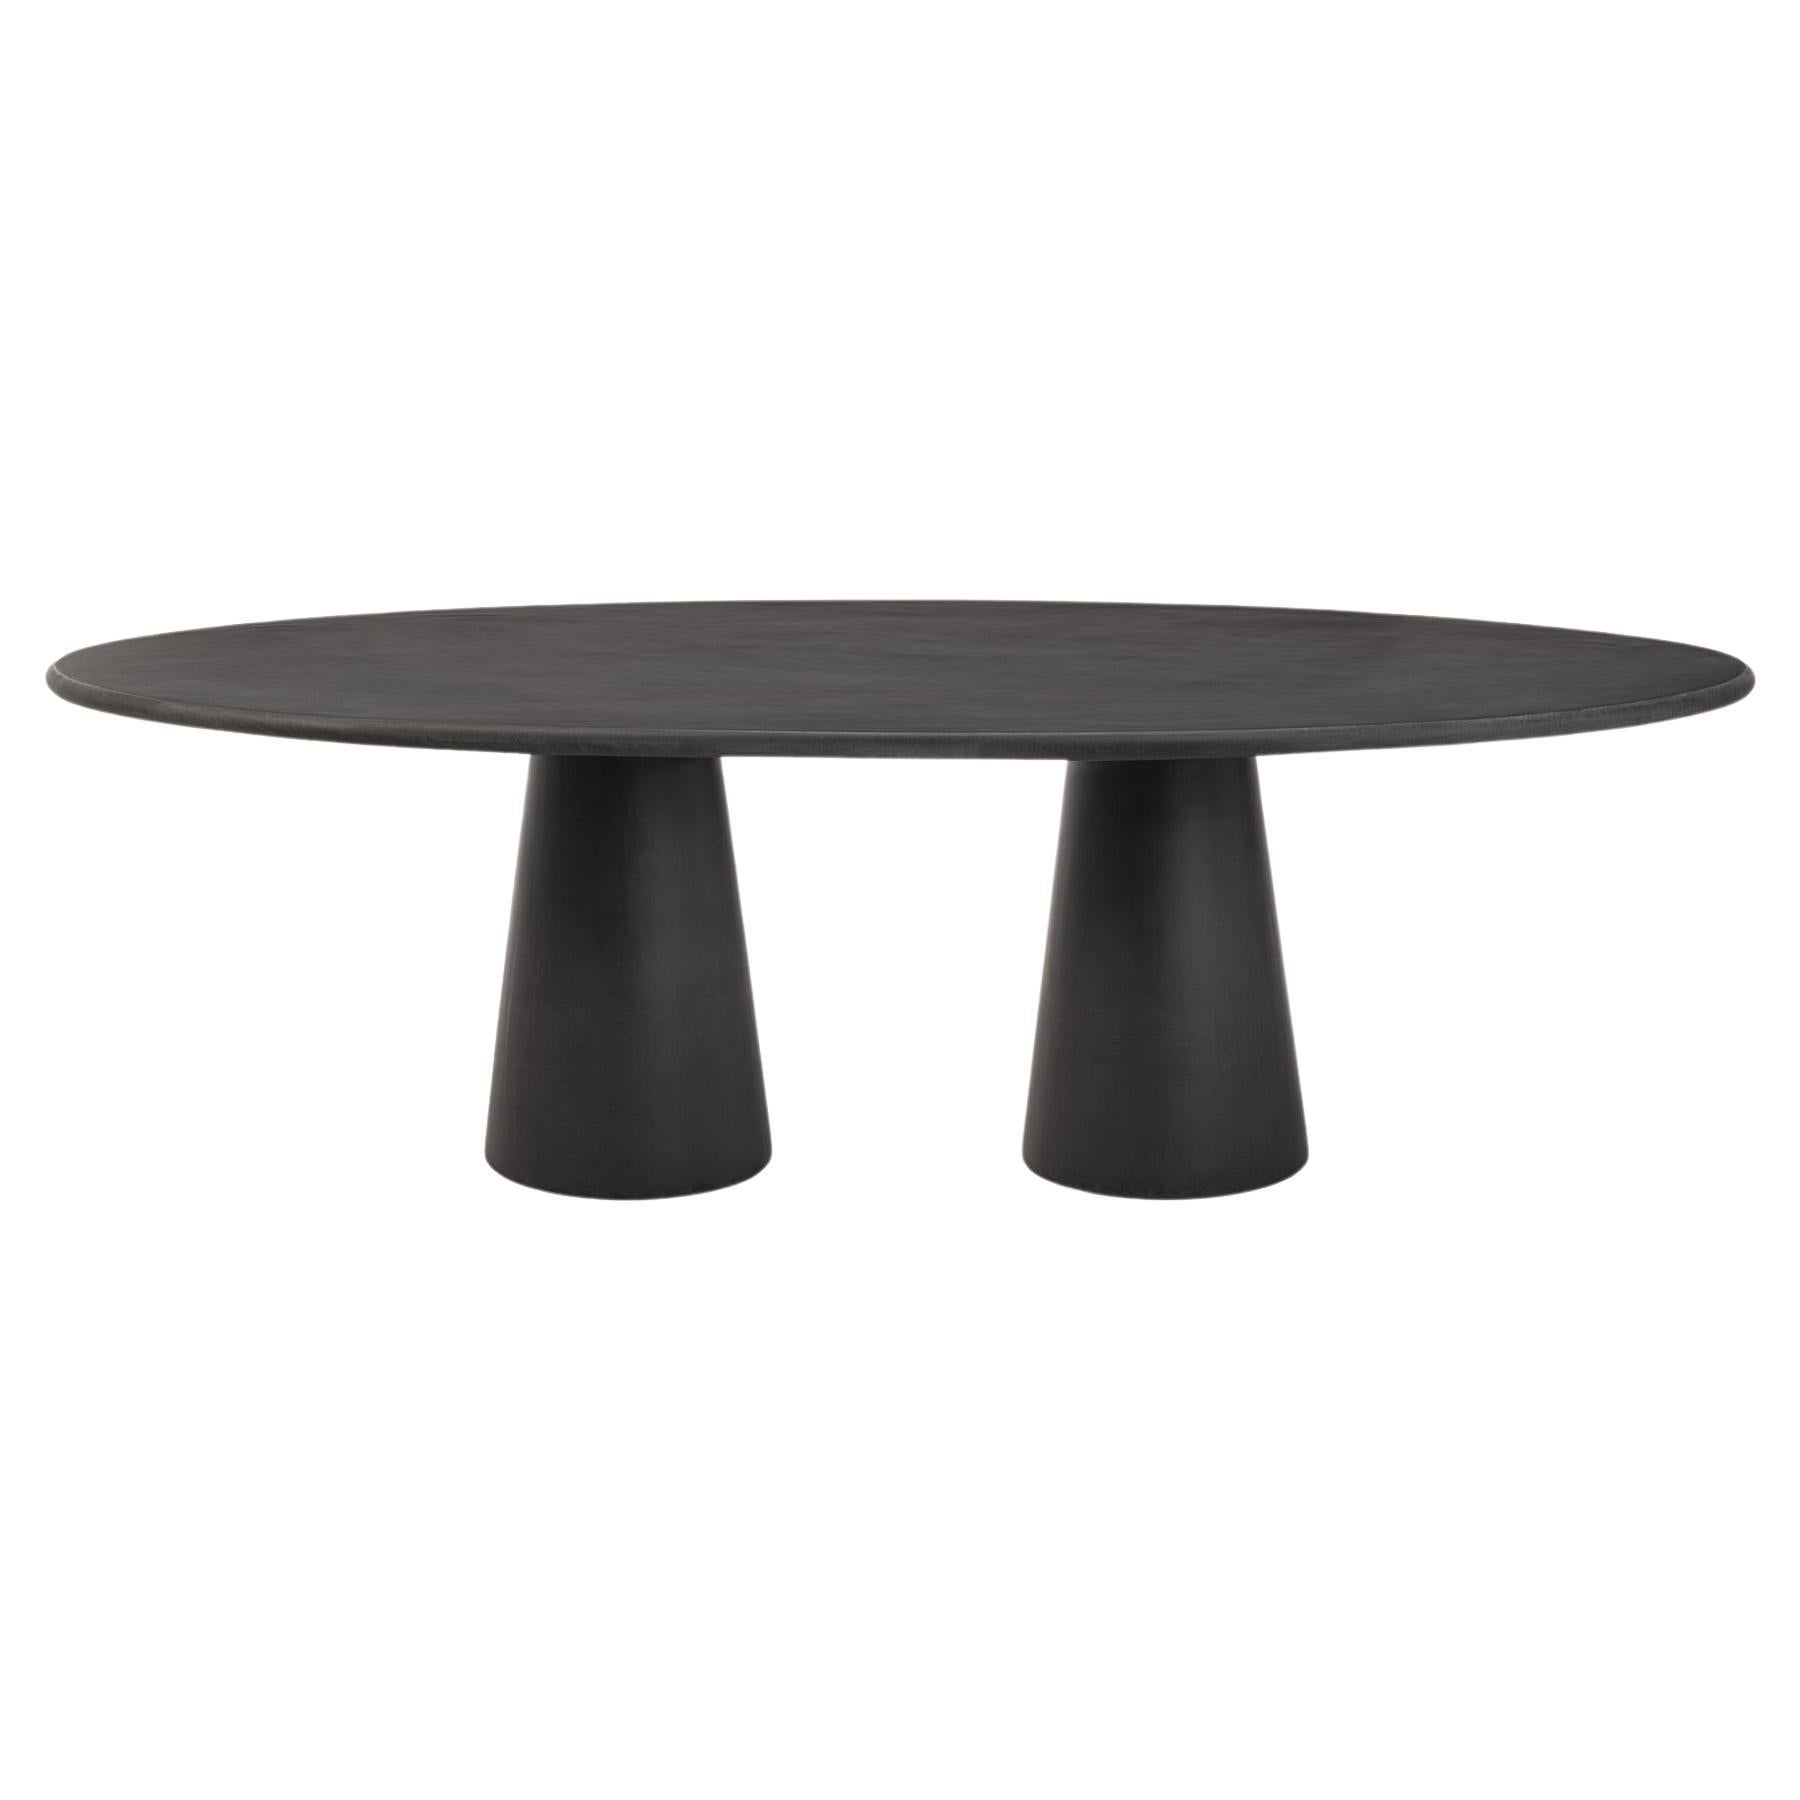 Natural Plaster Dining Table "Ellipsis" 280 by Isabelle Beaumont For Sale